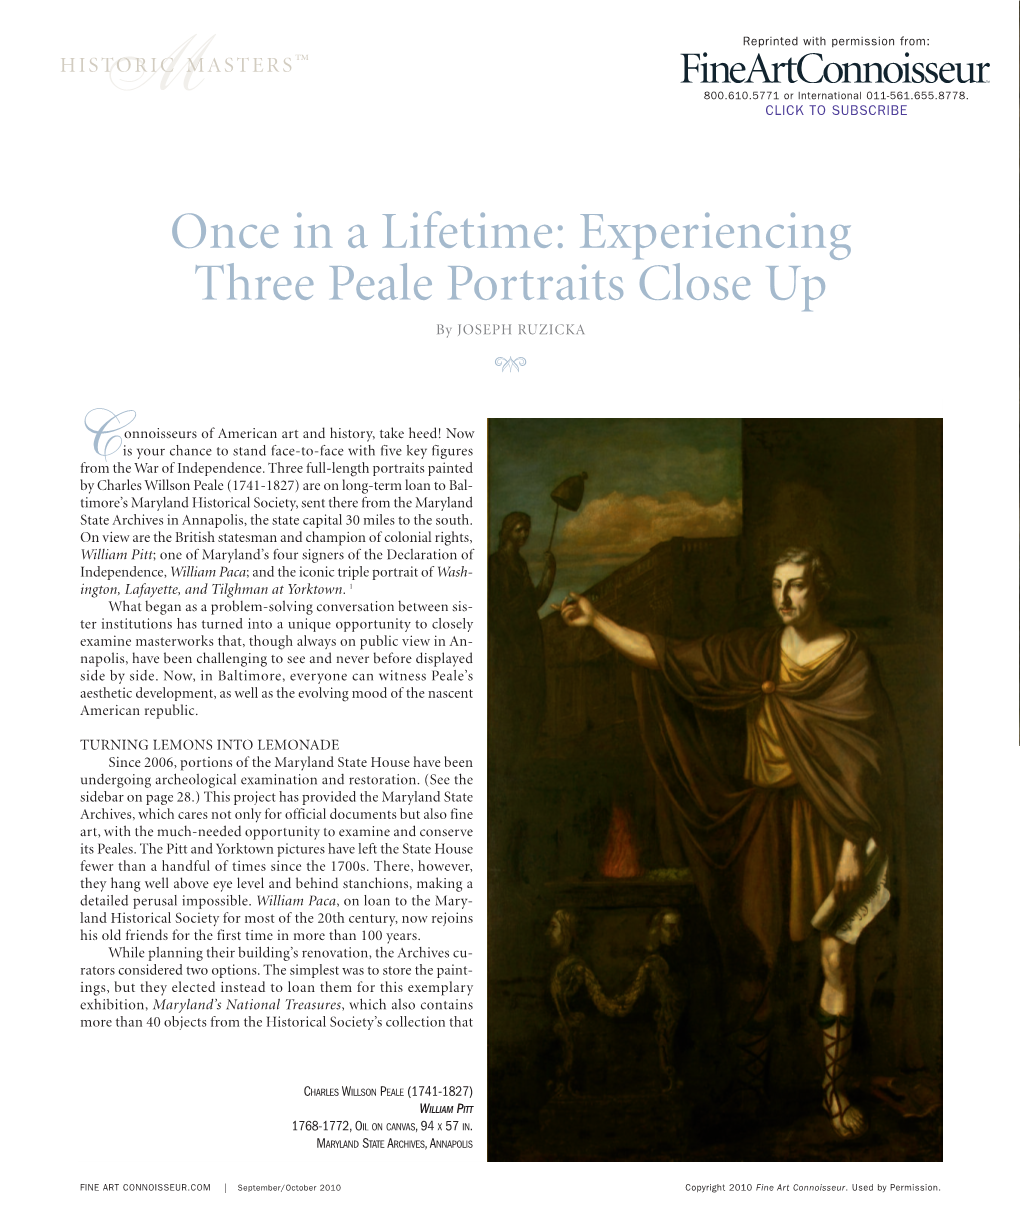 Once in a Lifetime: Experiencing Three Peale Portraits Close up by JOSEPH RUZICKA GH